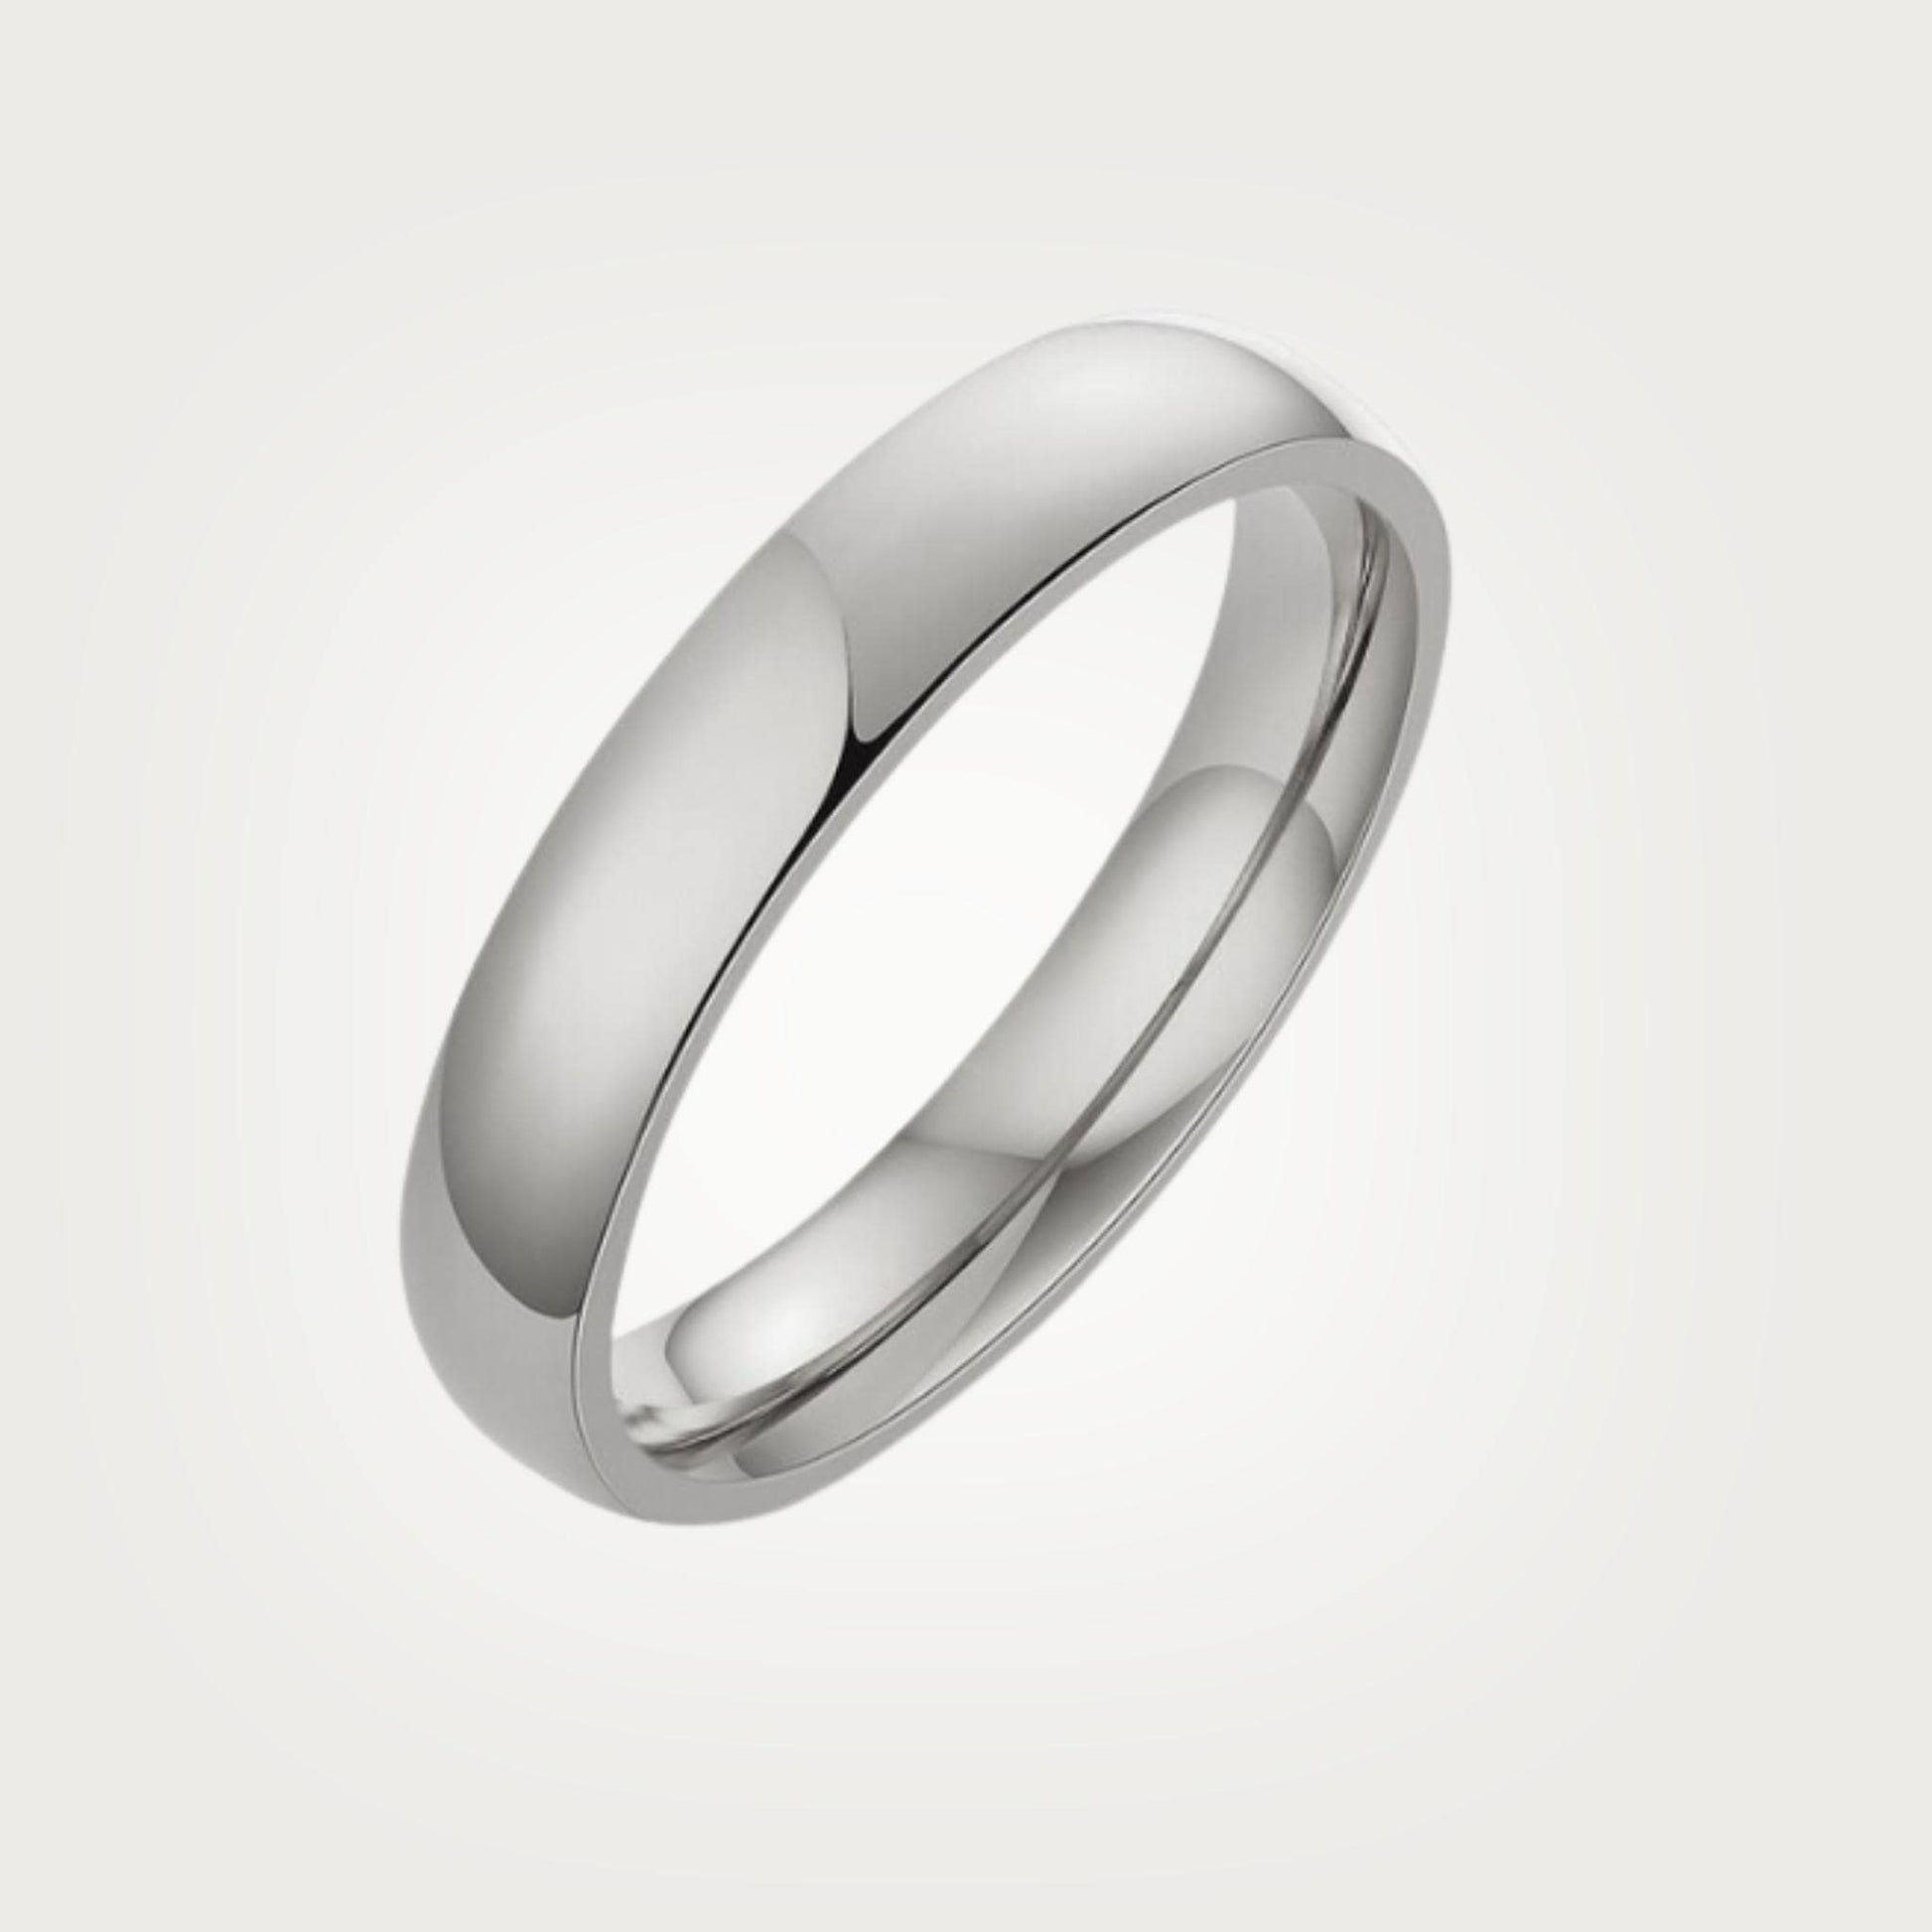 Silver 4mm Classic Ring For Women or Men - Ring - Boutique Wear RENN